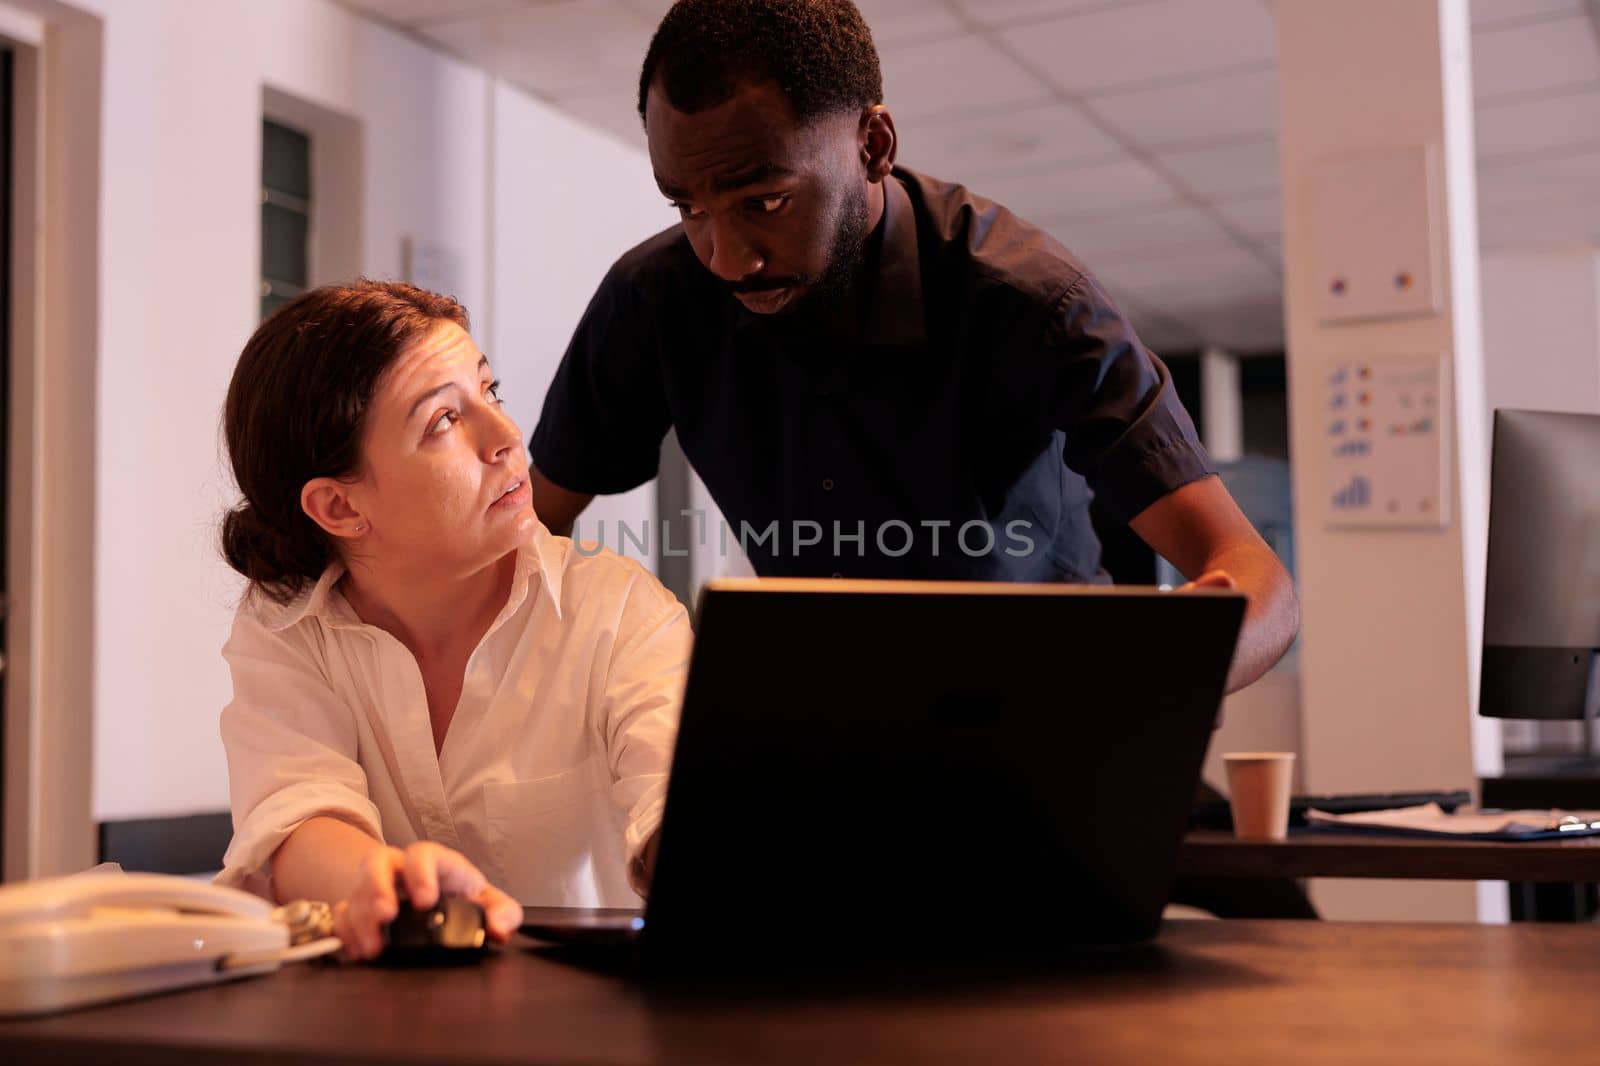 Man helping coworker analyzing report on laptop in office by DCStudio